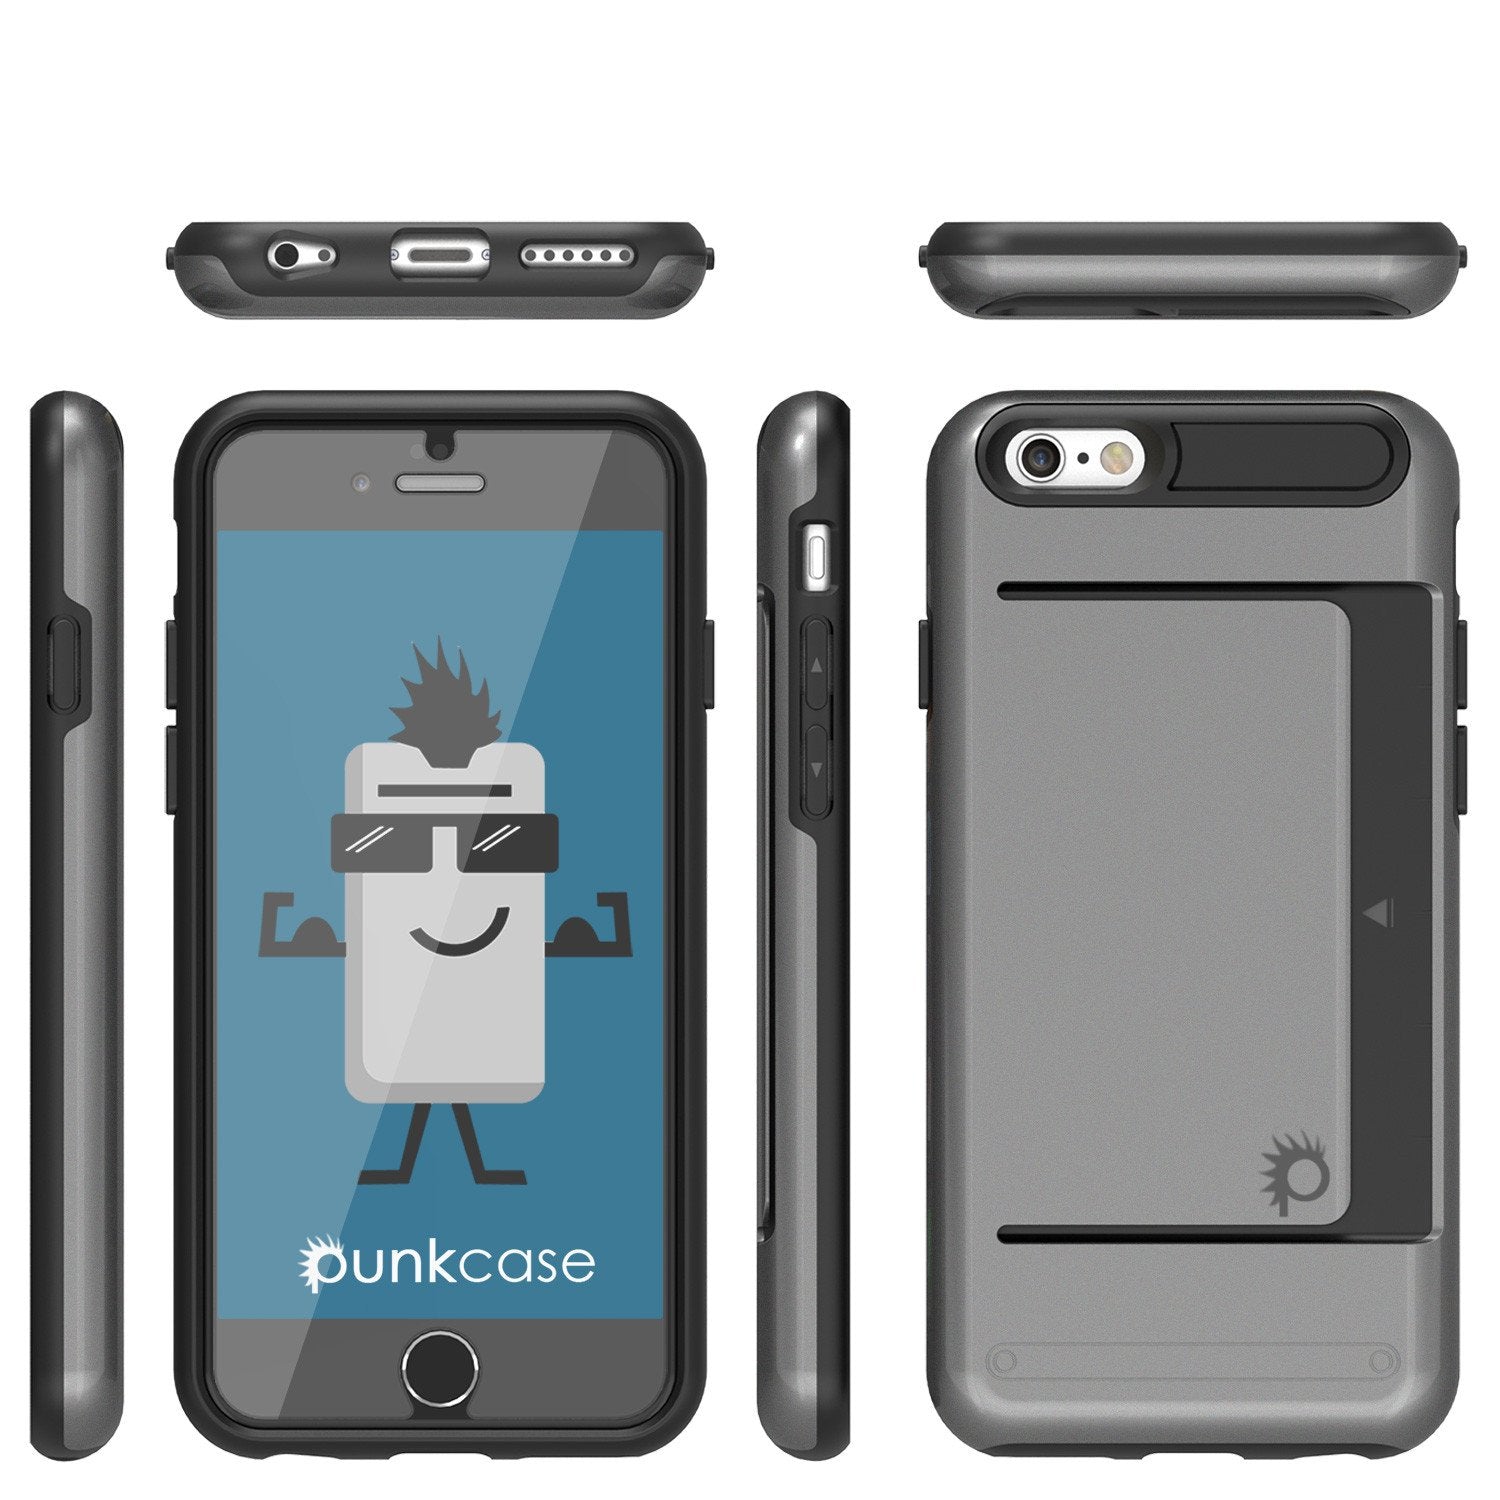 iPhone 6/6s Case PunkCase CLUTCH Grey Series Slim Armor Soft Cover Case w/ Tempered Glass